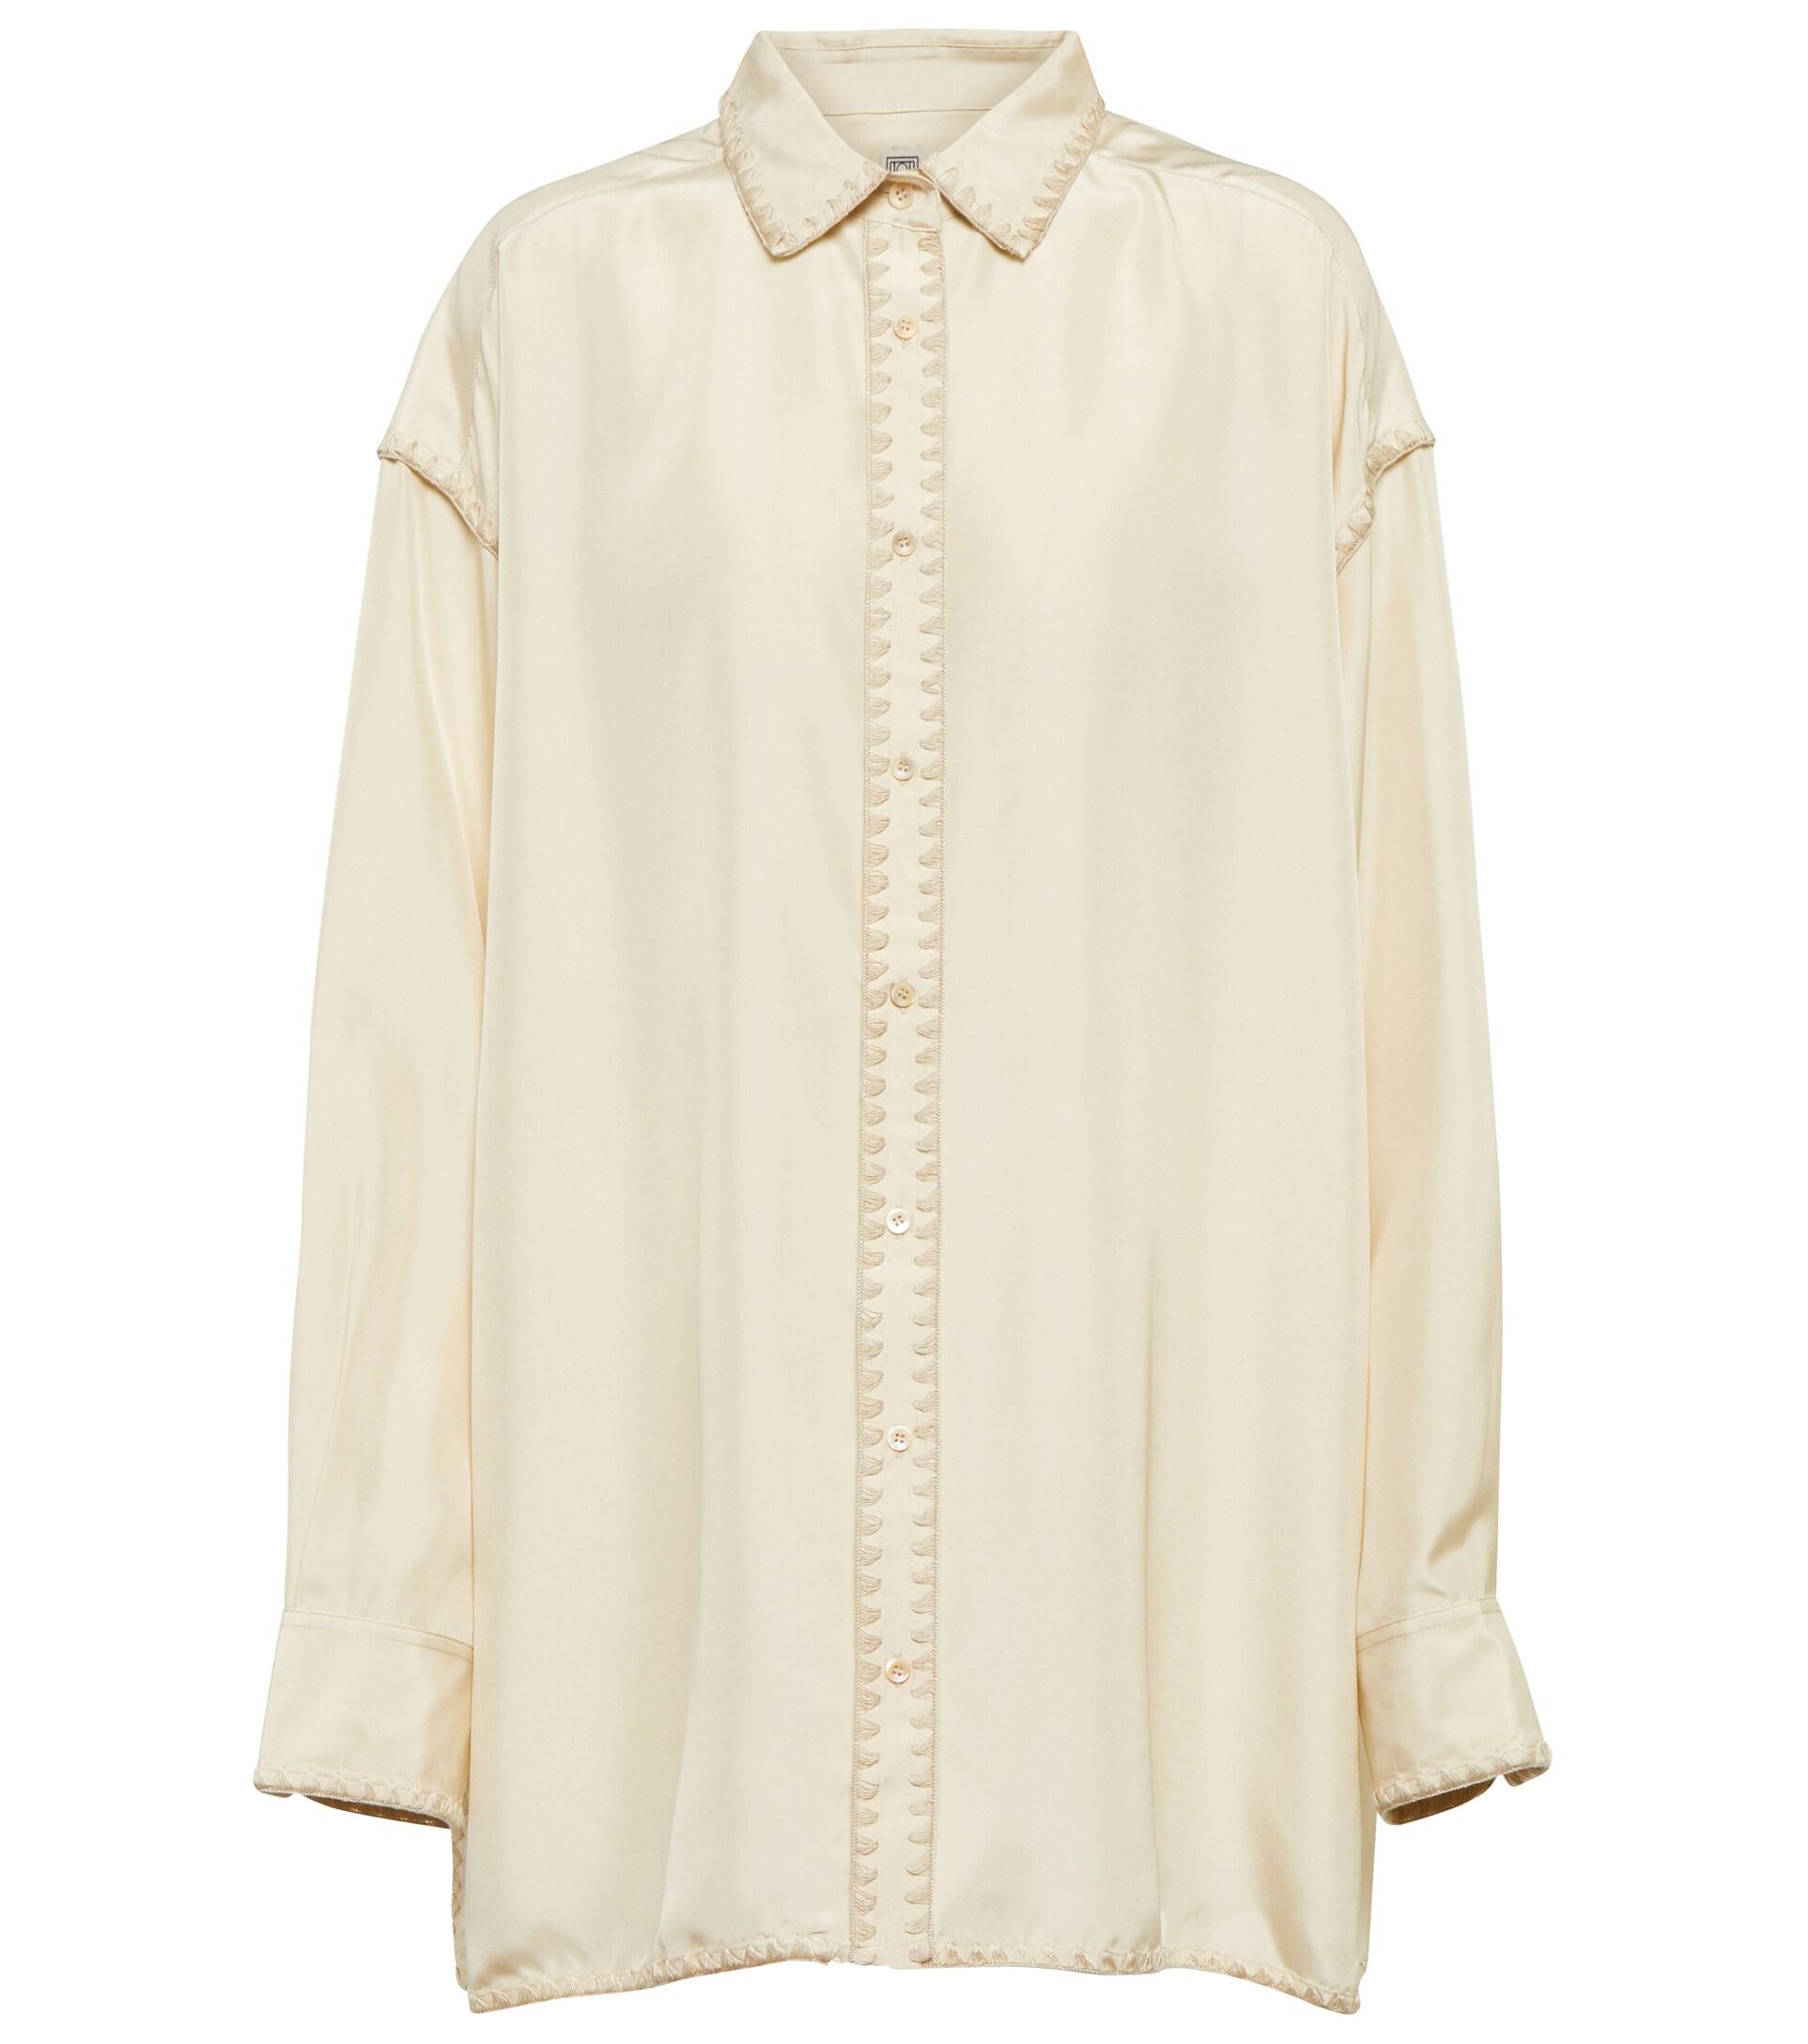 Totême Toteme Oversized Silk Shirt in Natural | Lyst